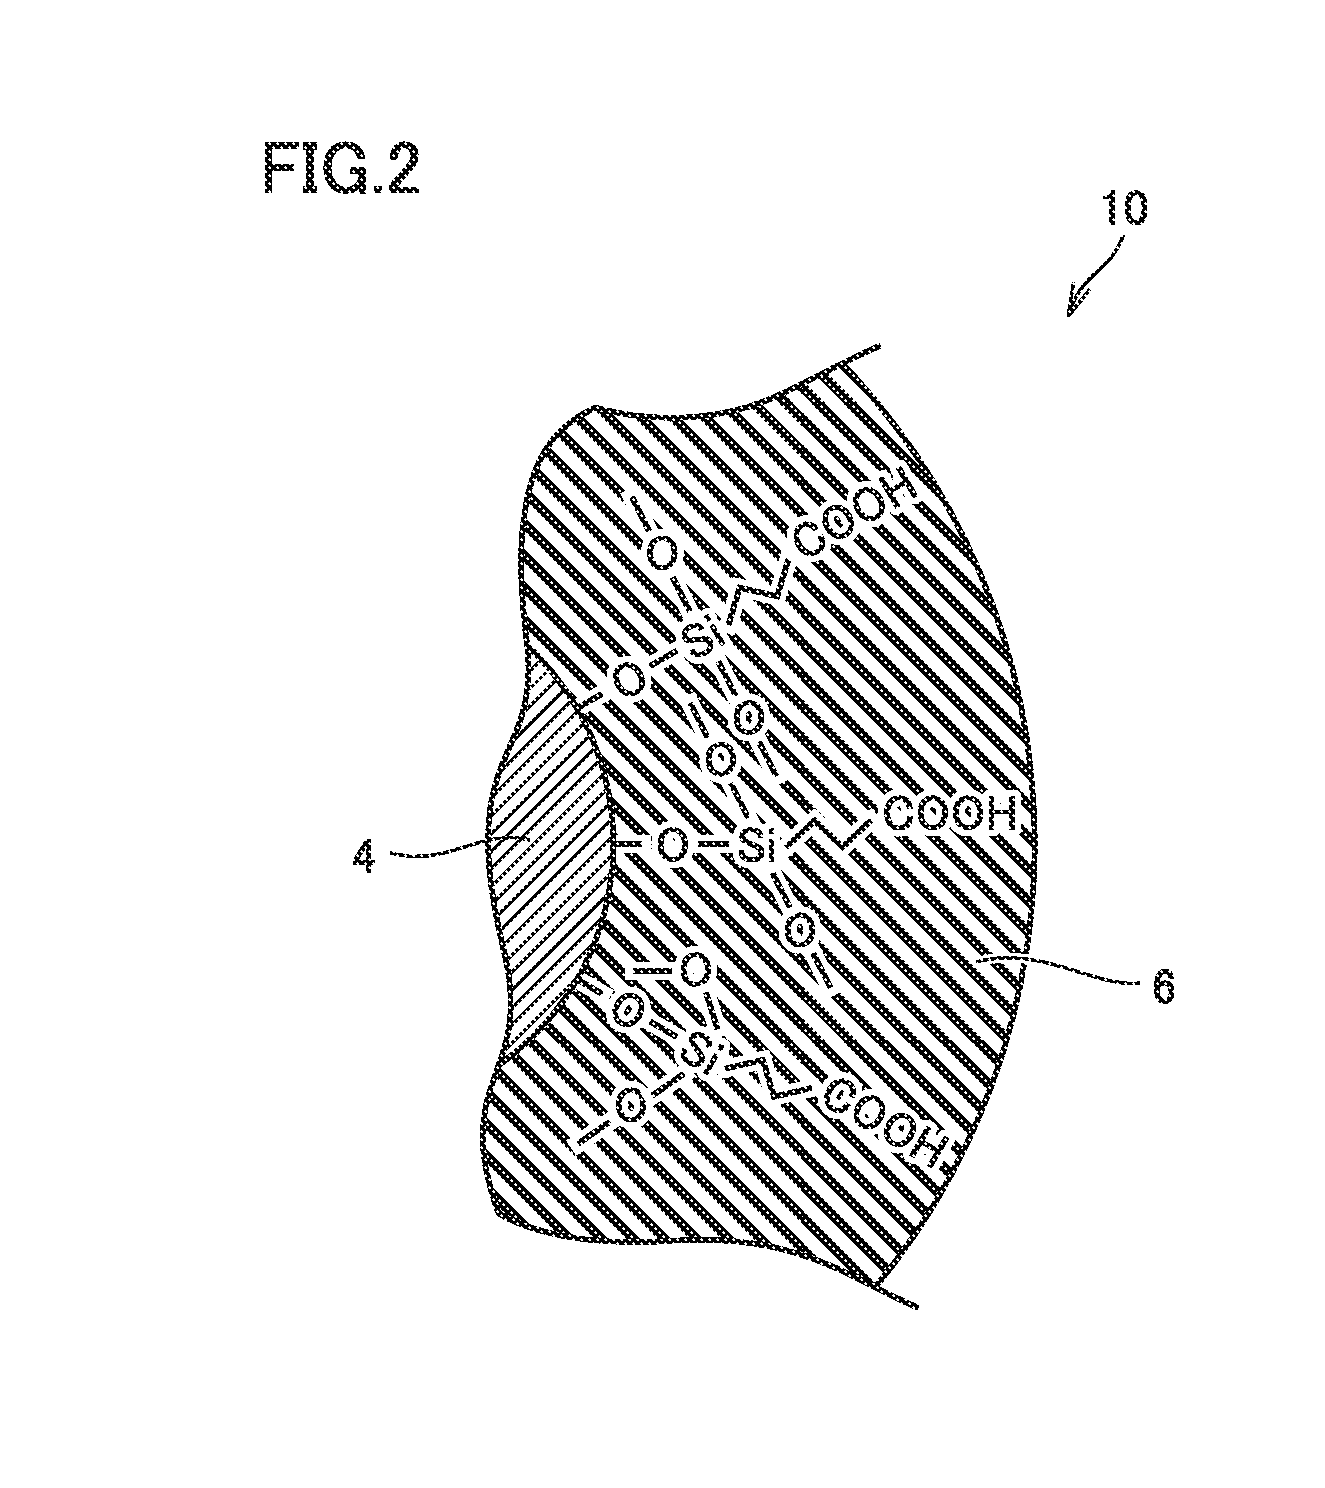 Semiconductor phosphor nanoparticle, semiconductor phosphor nanoparticle-containing glass, light emitting device, and light emitting element